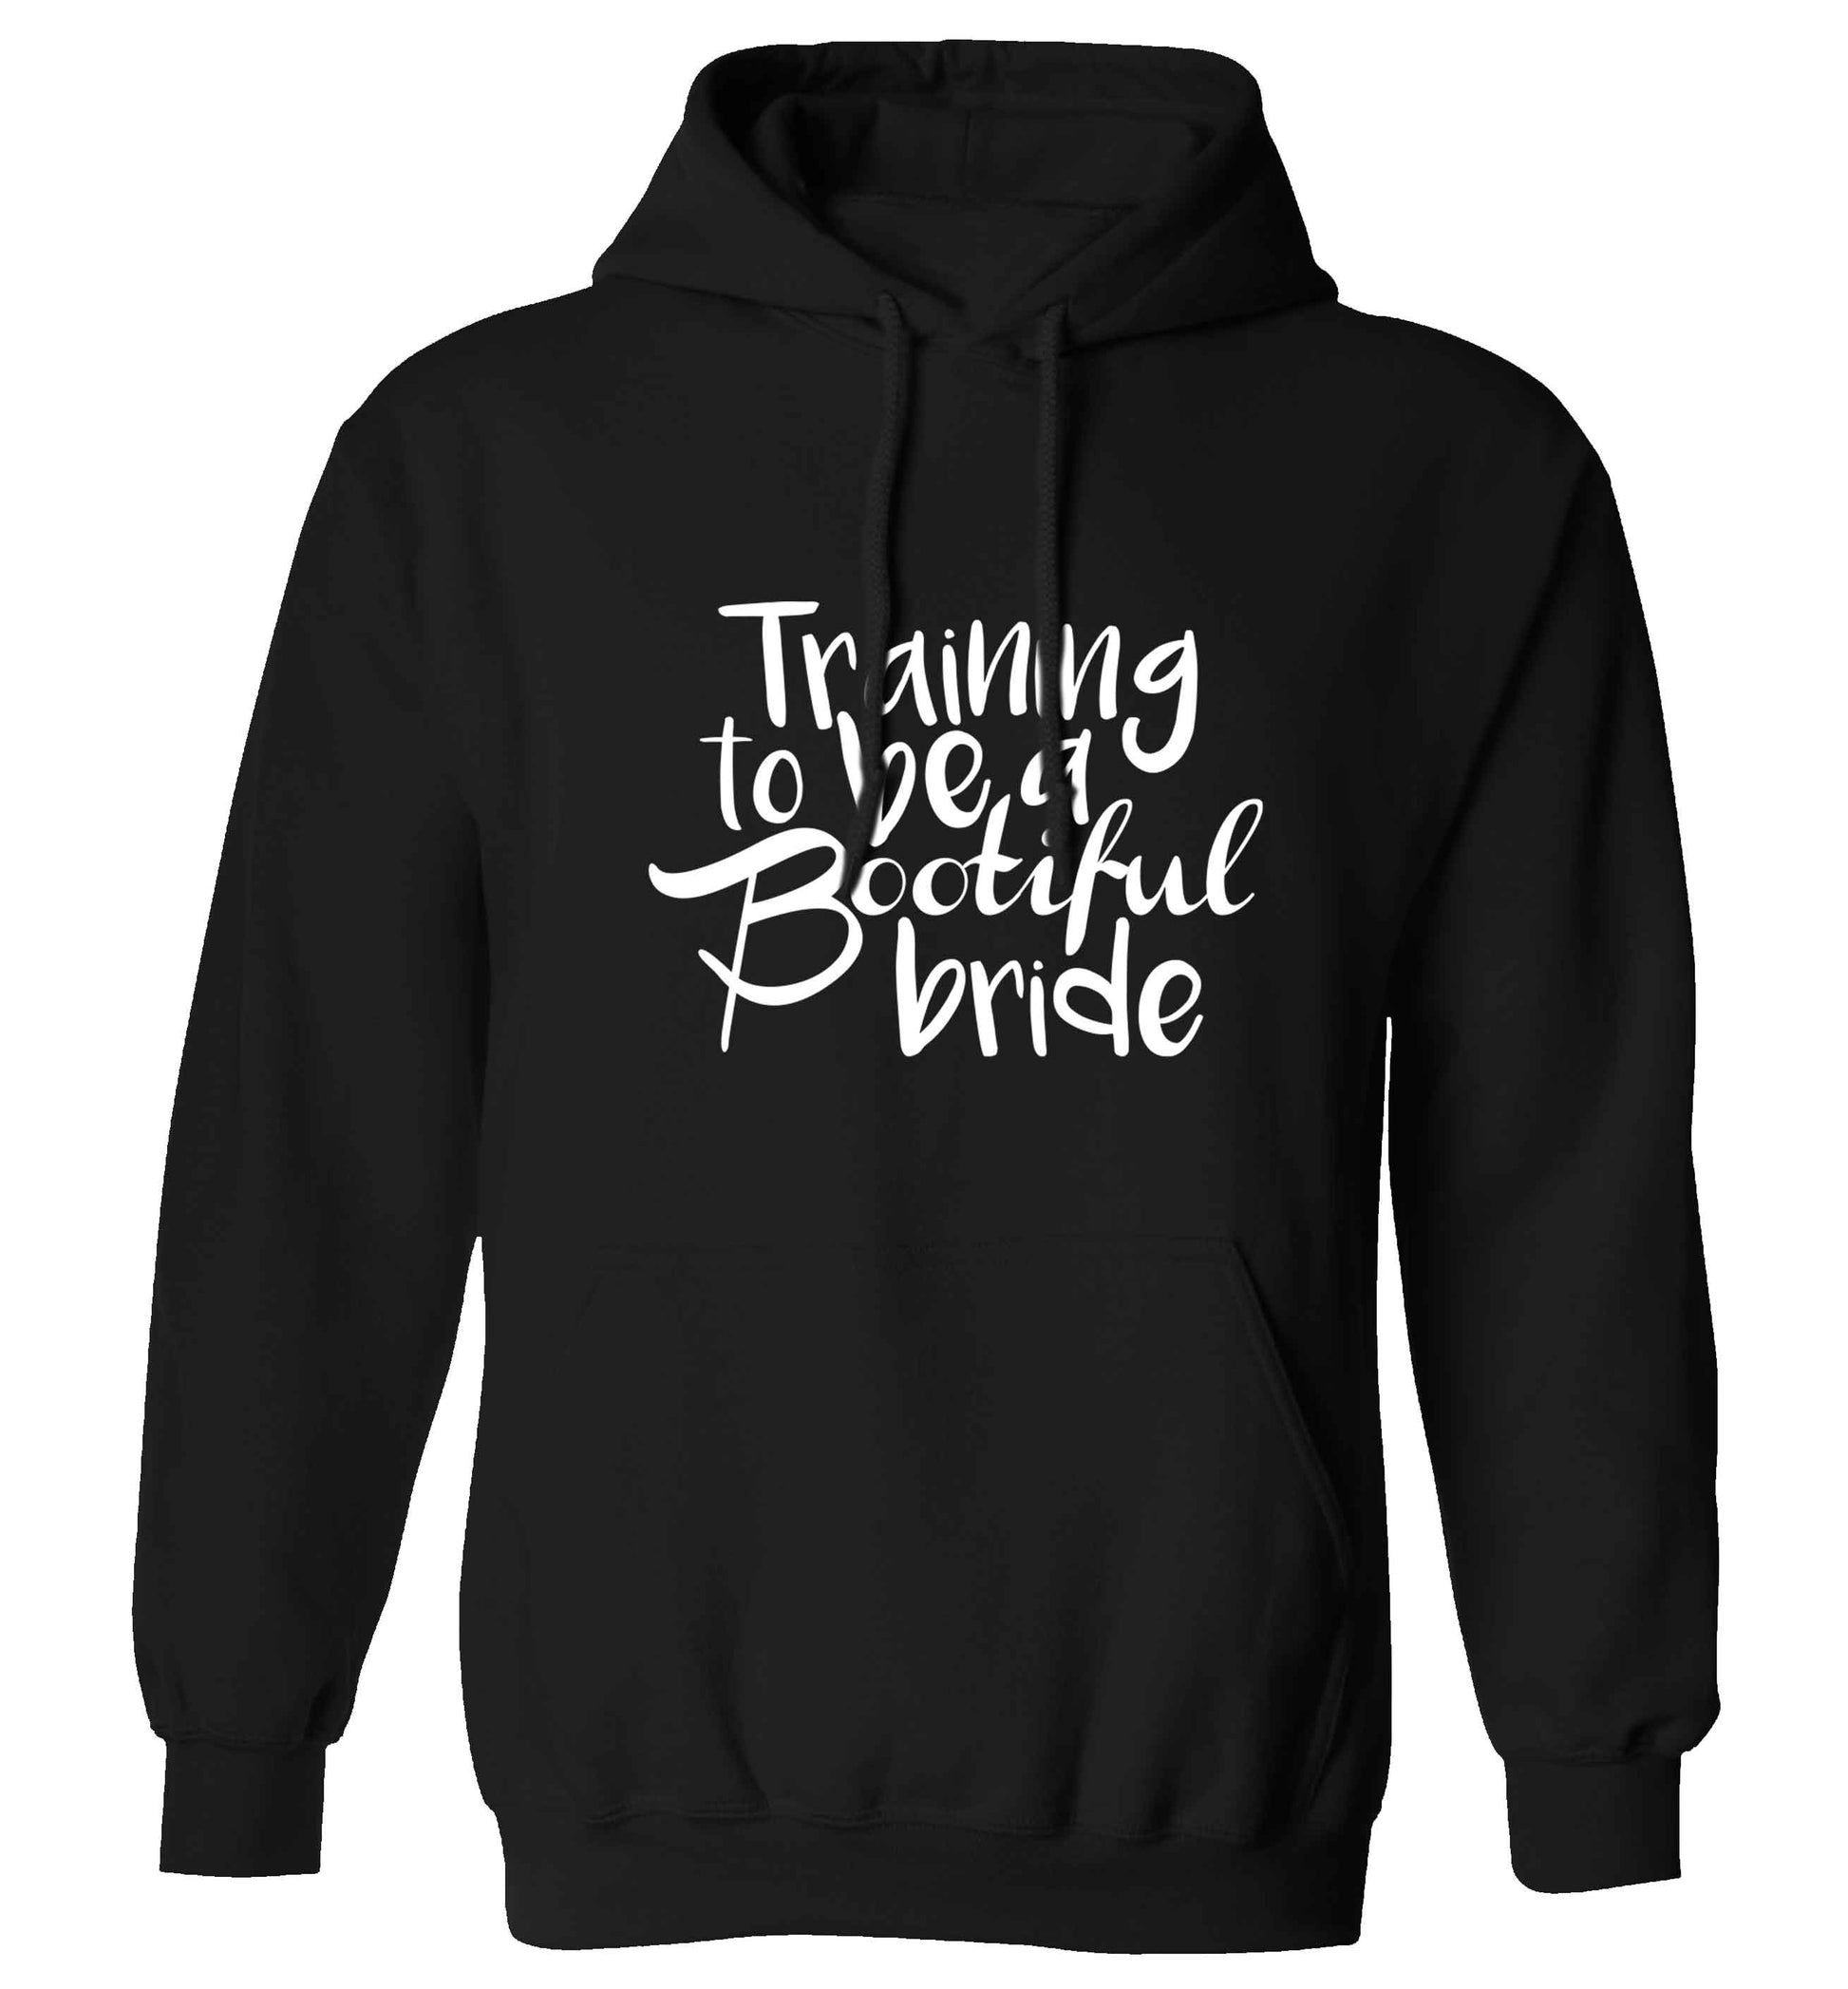 Get motivated and get fit for your big day! Our workout quotes and designs will get you ready to sweat! Perfect for any bride, groom or bridesmaid to be!  adults unisex black hoodie 2XL